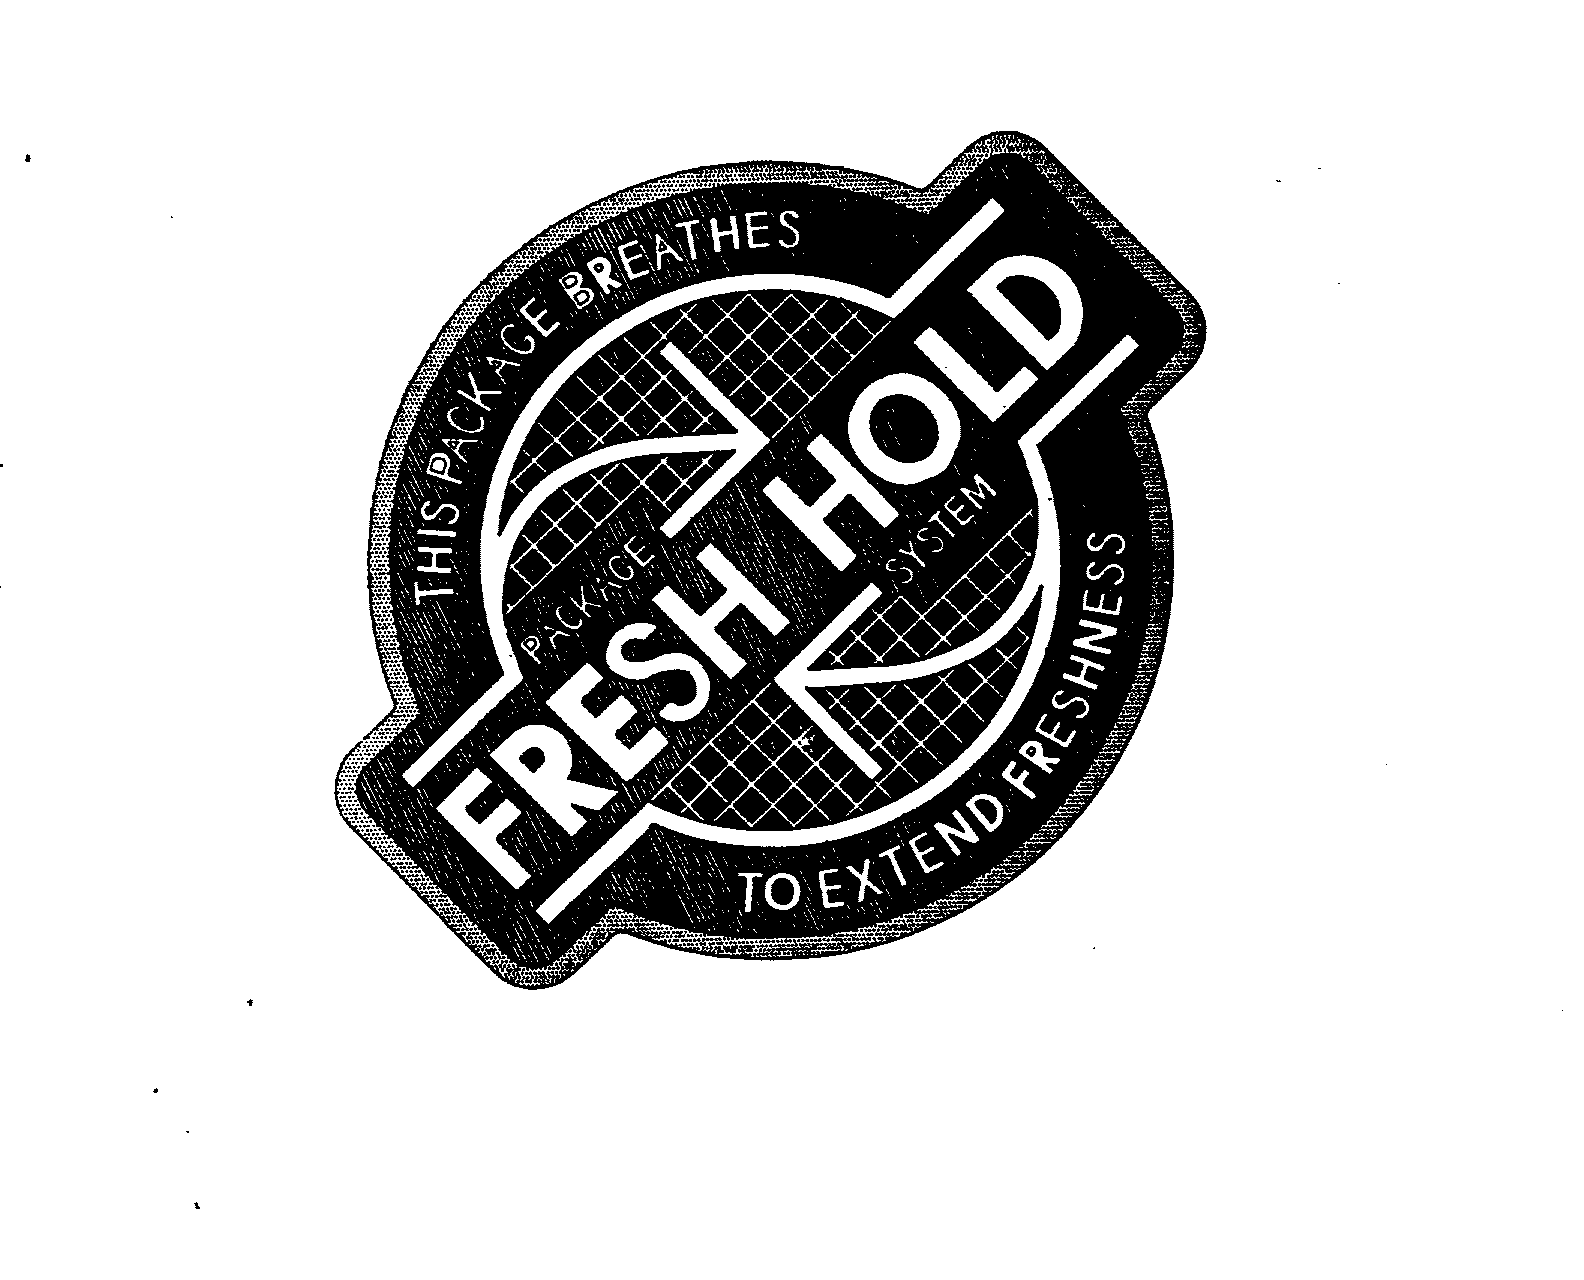  FRESH HOLD PACKAGE SYSTEM THIS PACKAGE BREATHES TO EXTEND FRESHNESS